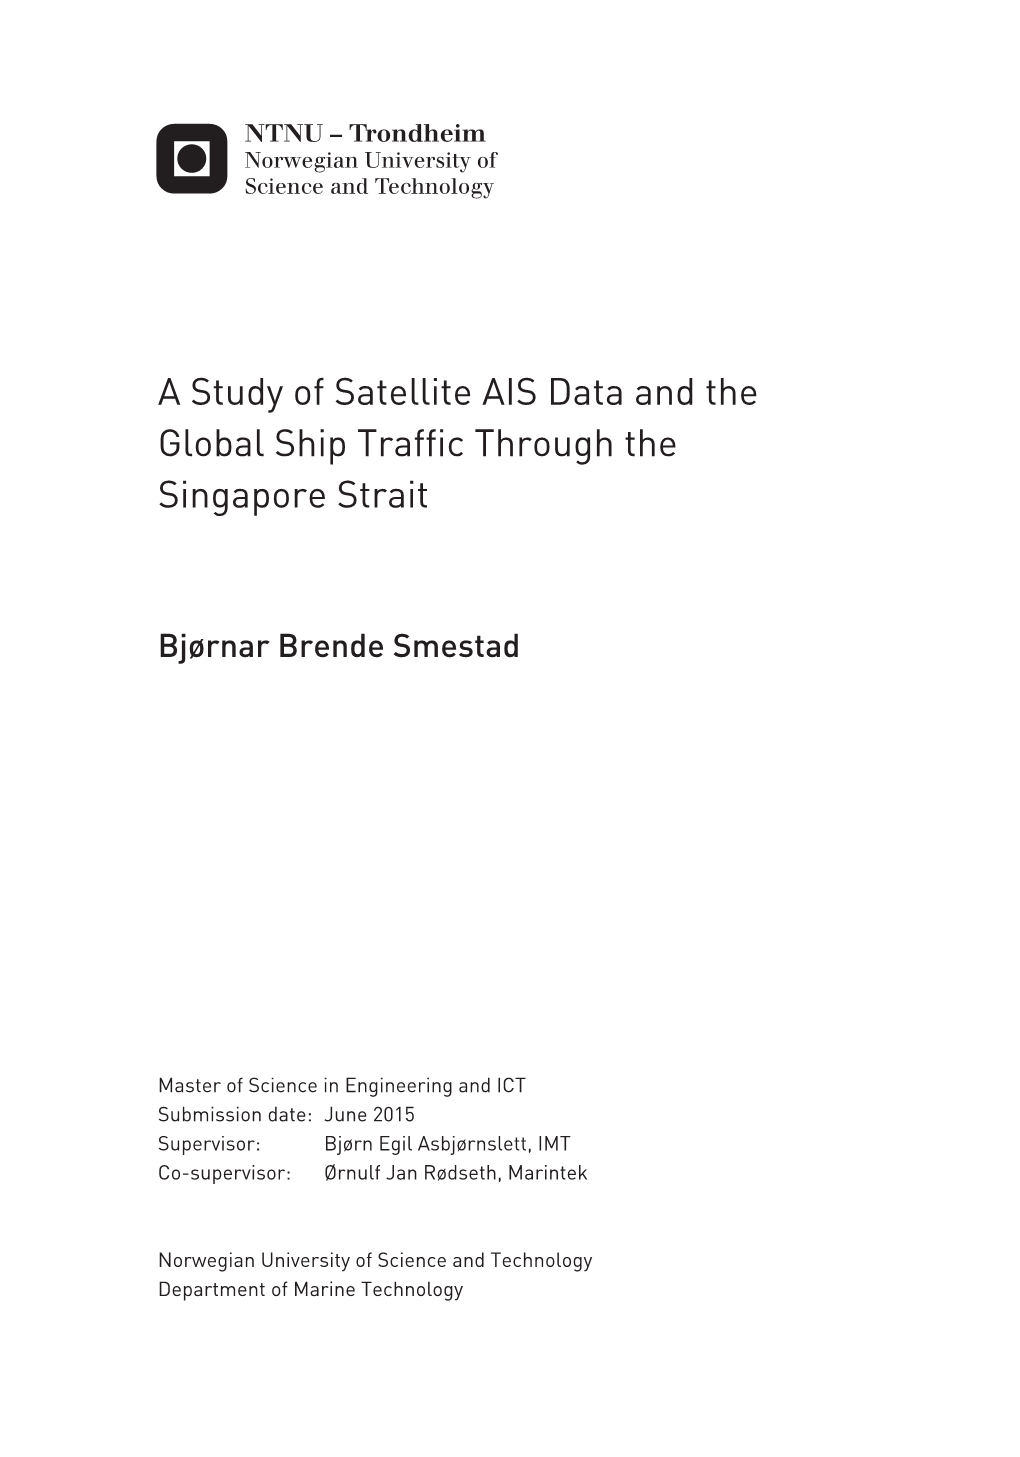 A Study of Satellite AIS Data and the Global Ship Traffic Through the Singapore Strait